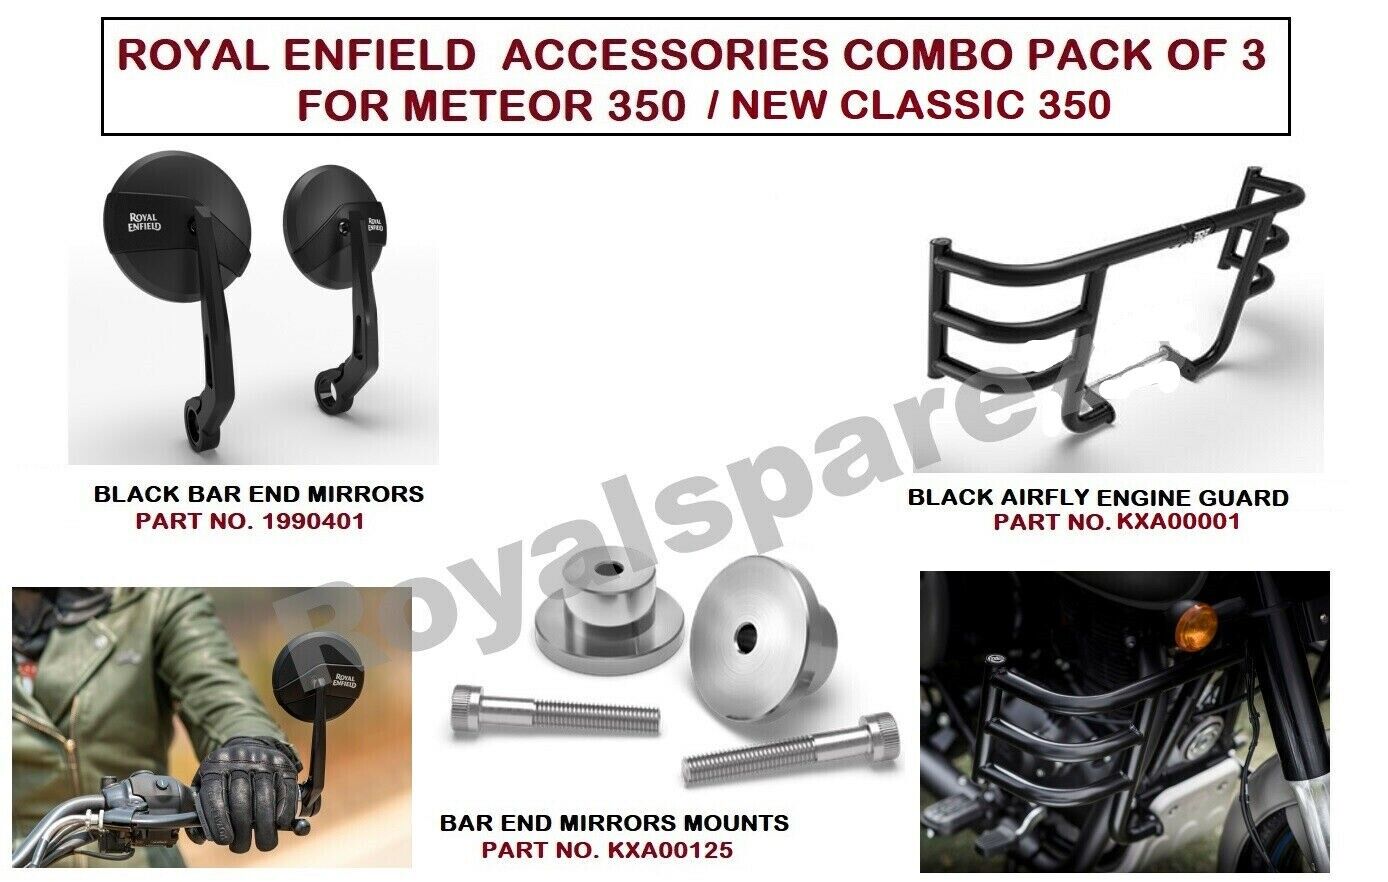 ACCESSORIES COMBO PACK OF 3 FITS ROYAL ENFIELD METEOR 350 / NEW CLASSIC 350